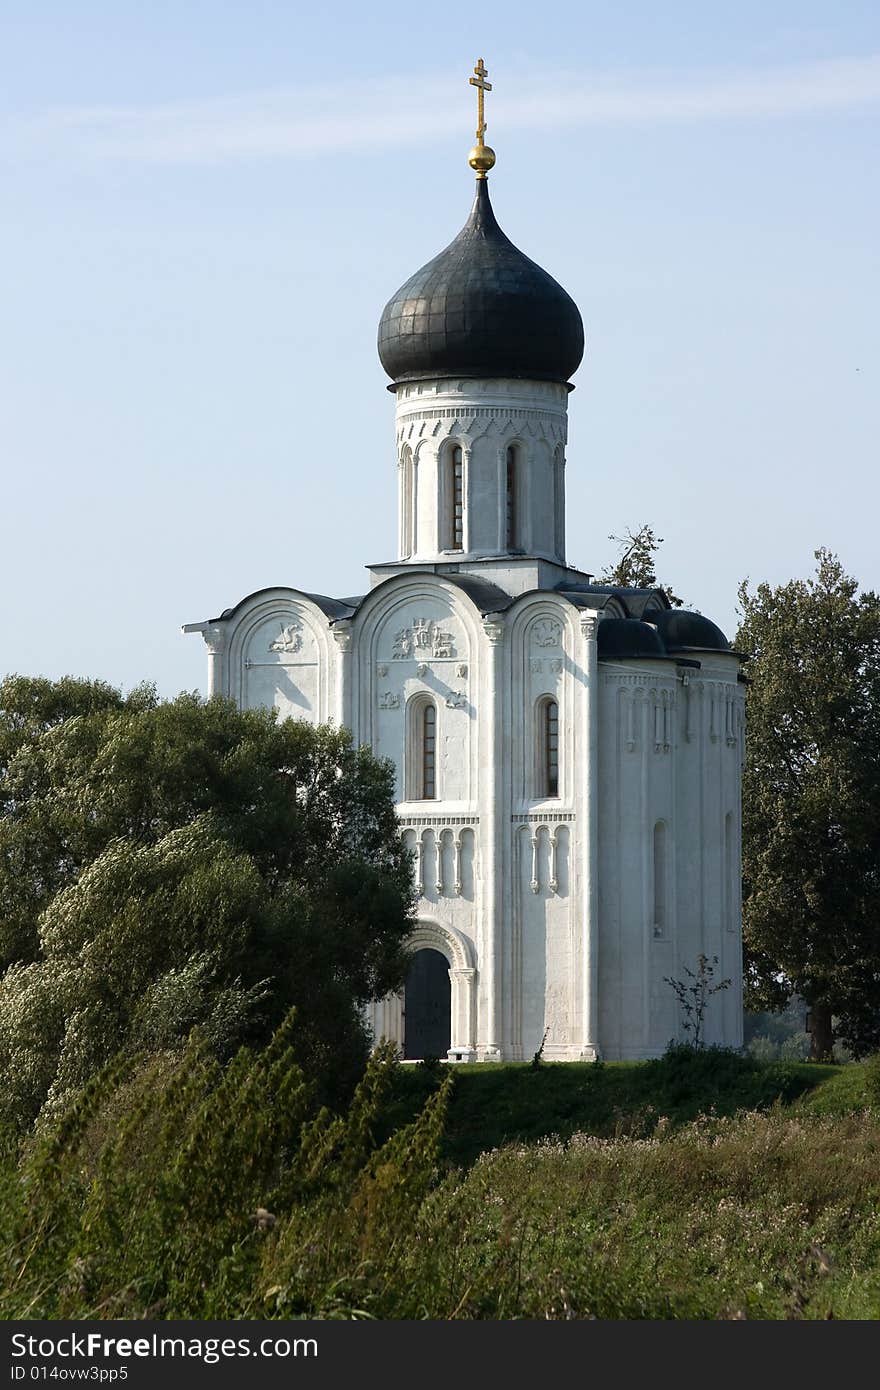 The Church of the Intercession of the Holy Virgin on the Nerl River is known for simplicity of its forms and nature landscape surrounding it. The Church of the Intercession of the Holy Virgin on the Nerl River is known for simplicity of its forms and nature landscape surrounding it.